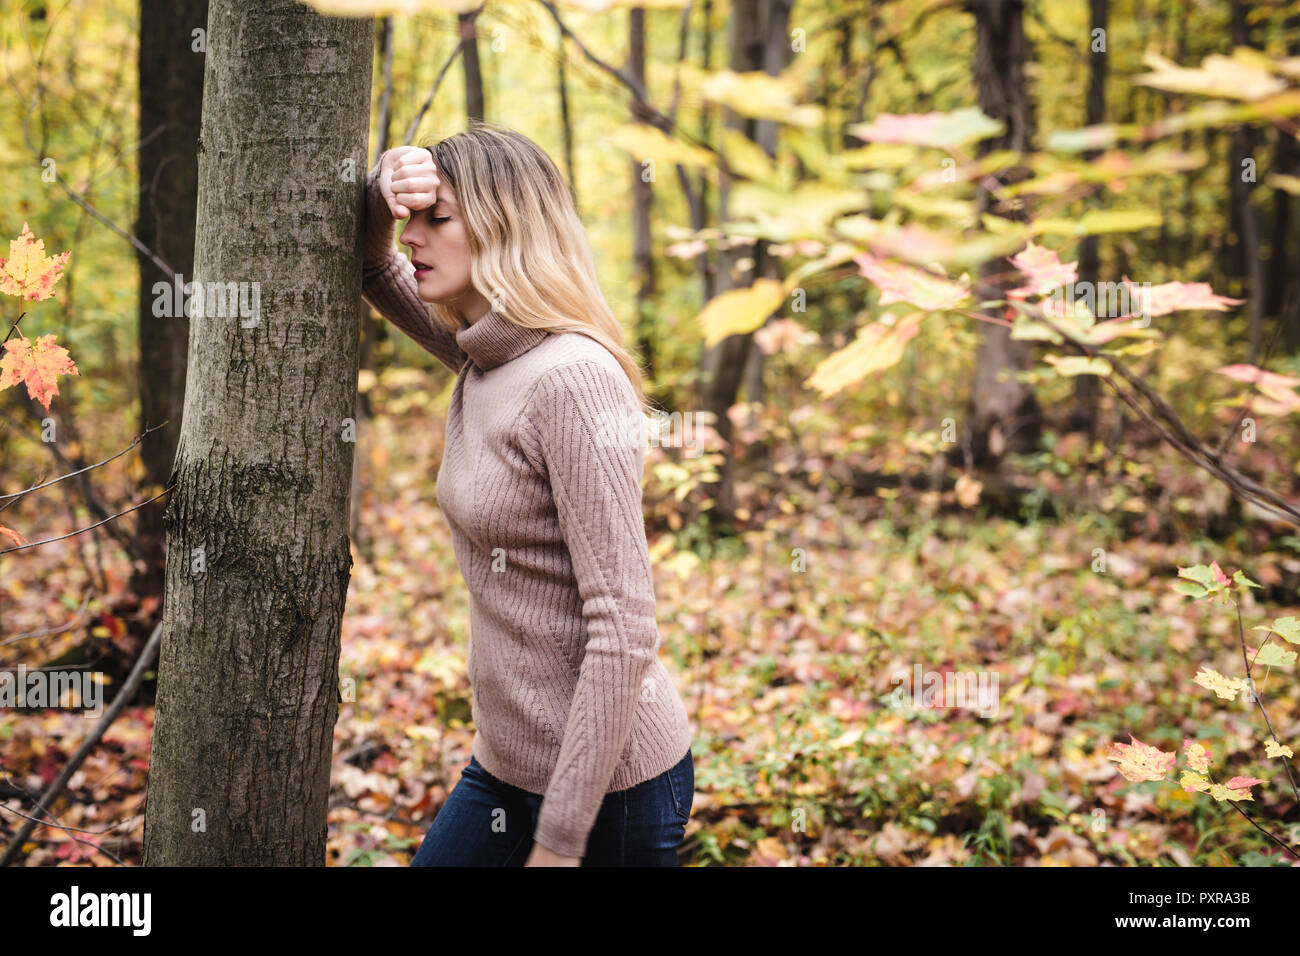 A Sad woman in park during autumn weather hiding face in hand, feeling terrible depressed. Stock Photo